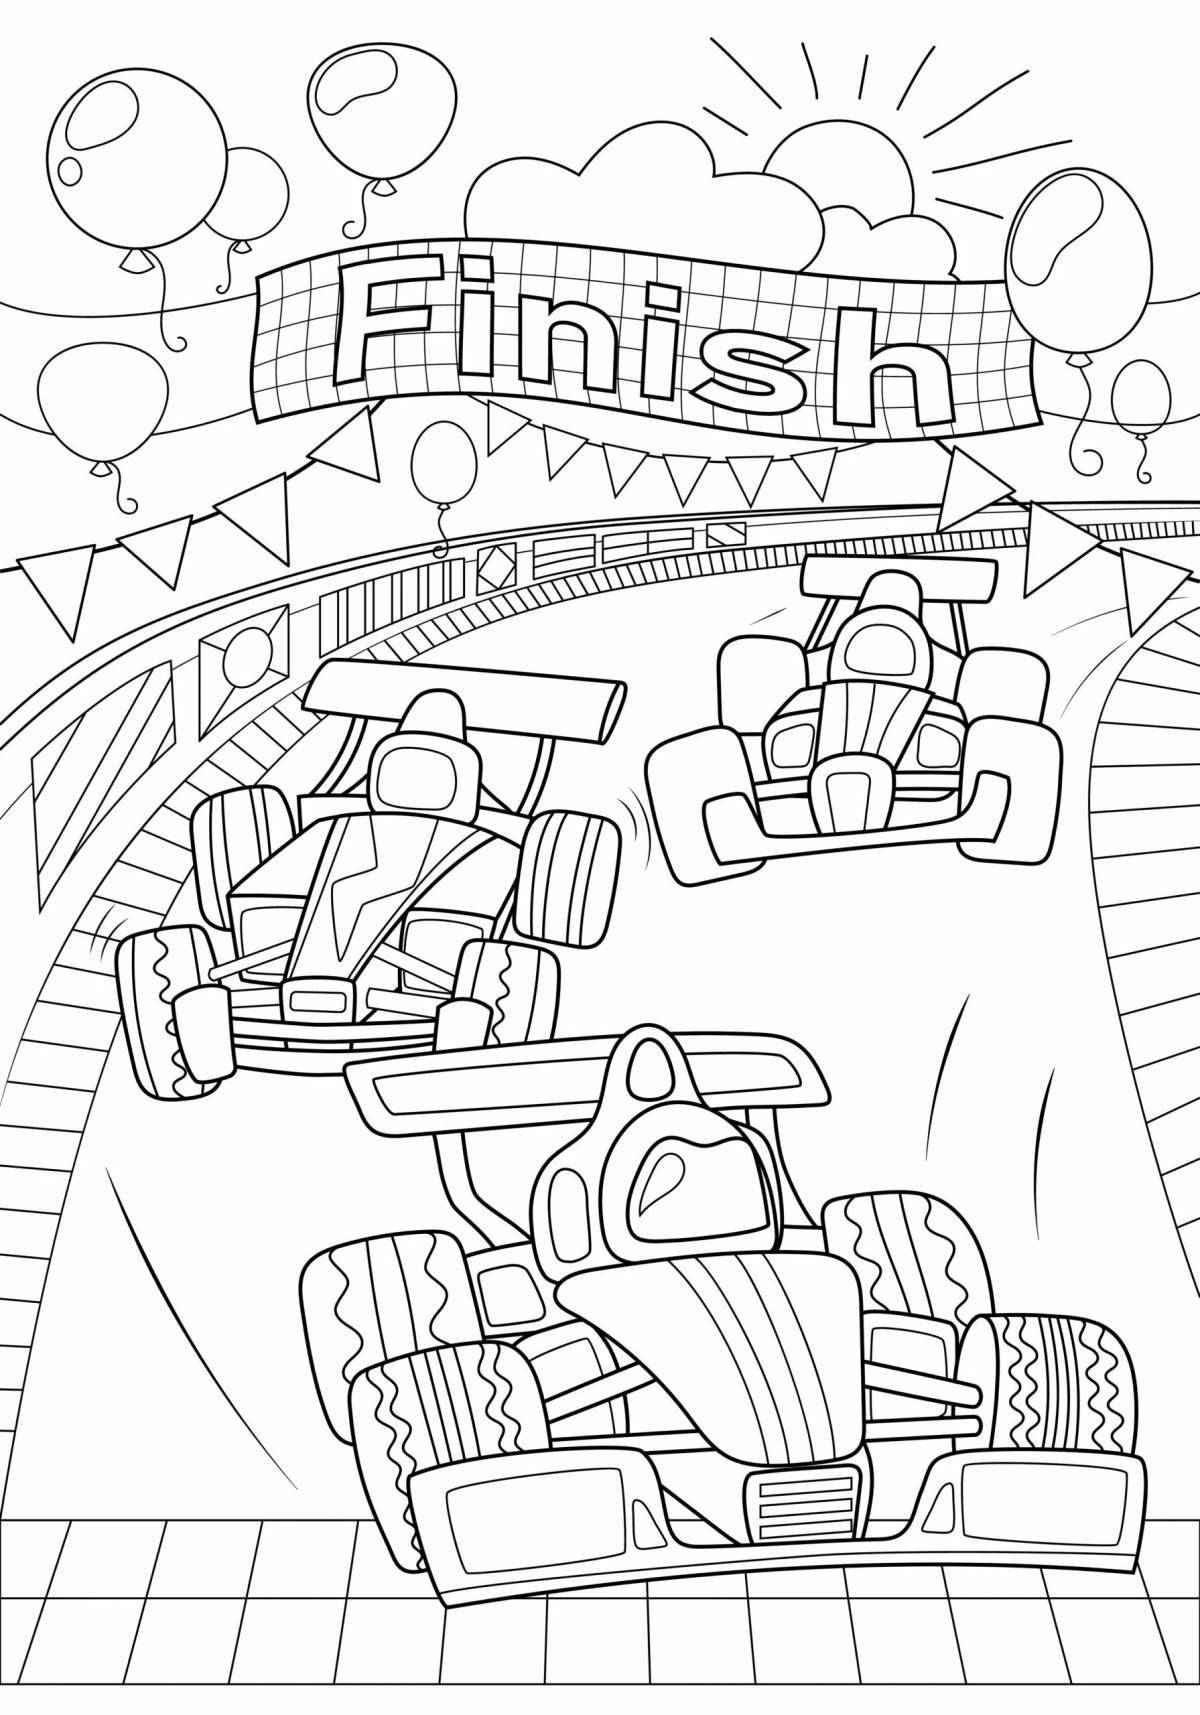 Coloring page funny race track